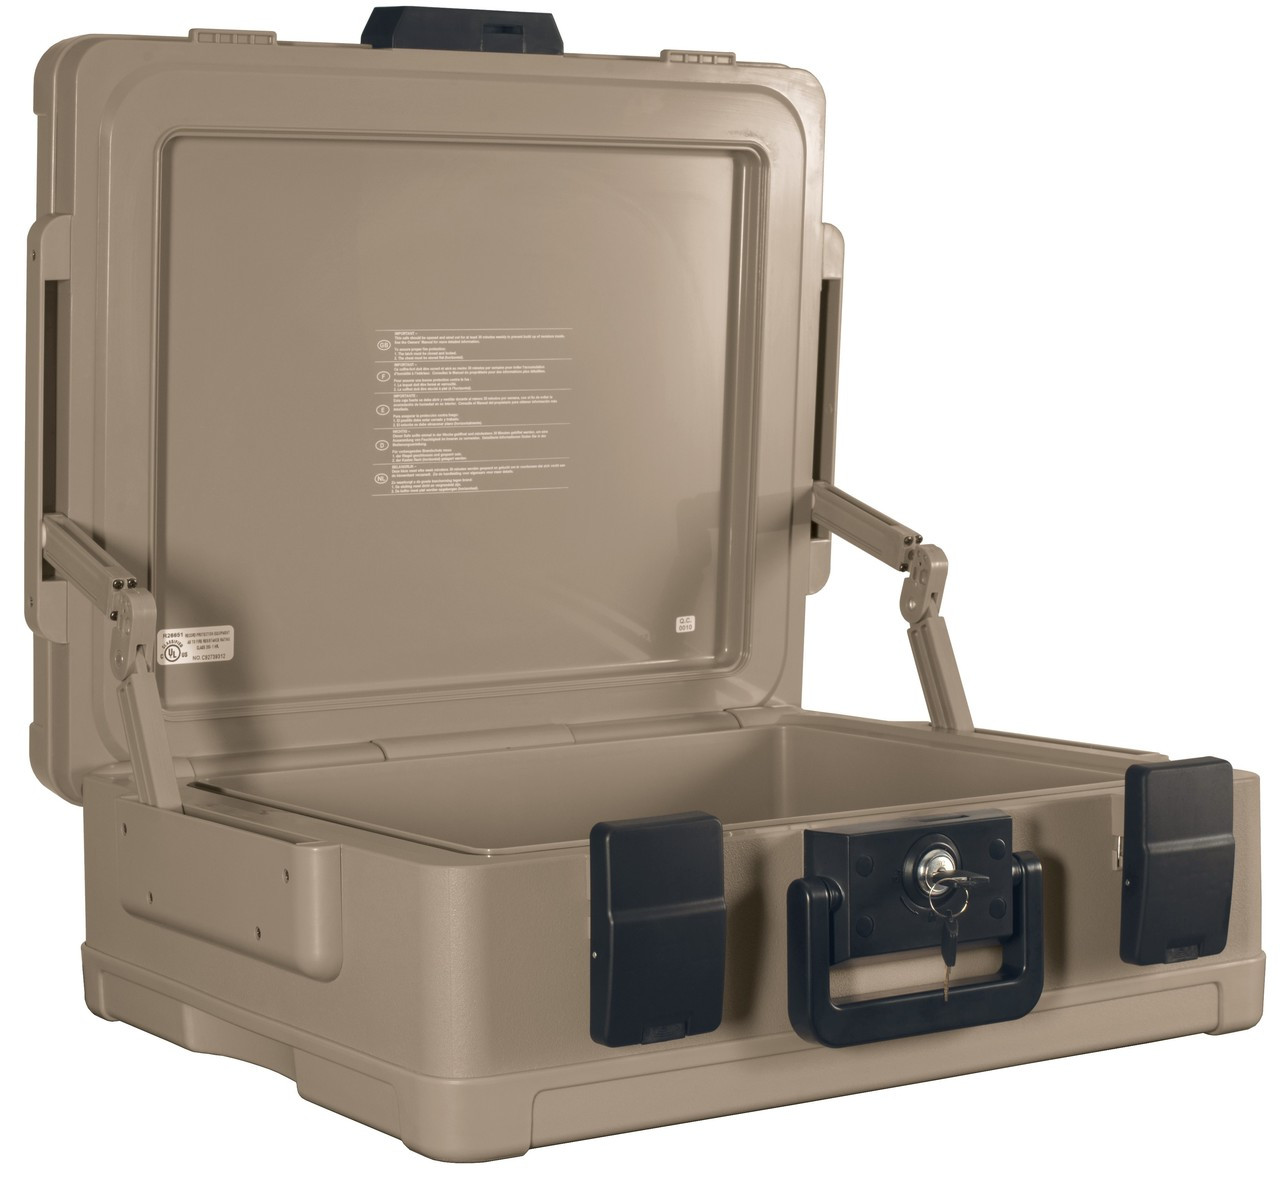 Fireking Fire and Waterproof Chest 0.38 ft3 19-9/10w x 17d x 7-3/10h Taupe SS104